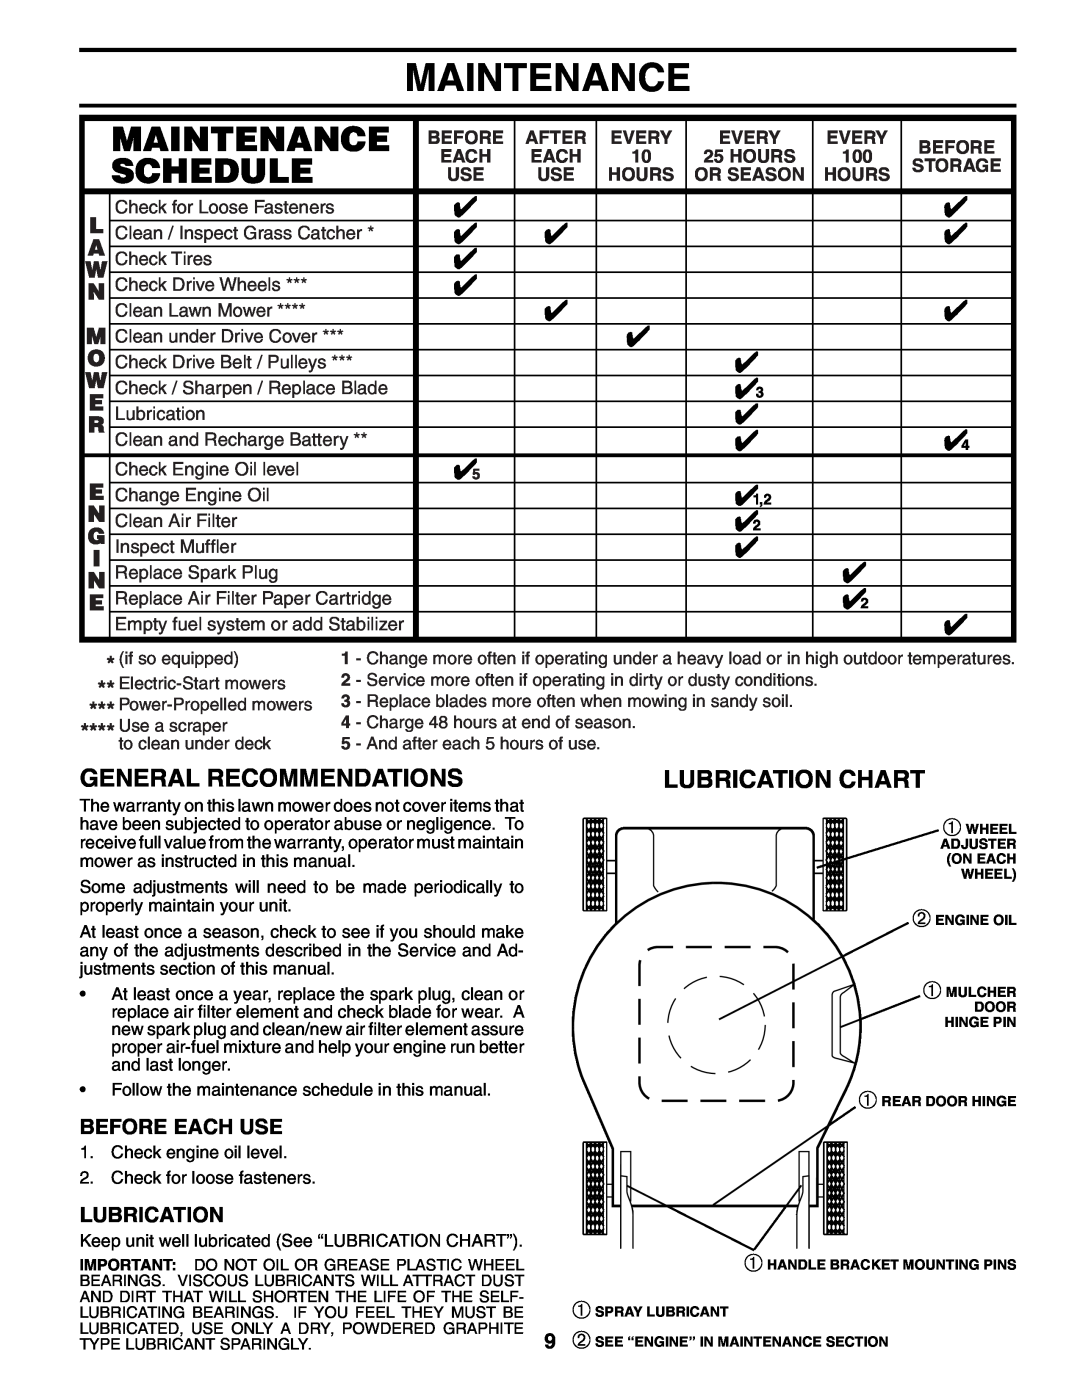 Husqvarna 65021CHV Maintenance, General Recommendations, Lubrication Chart, Before Each Use, After, Every, Storage, Hours 